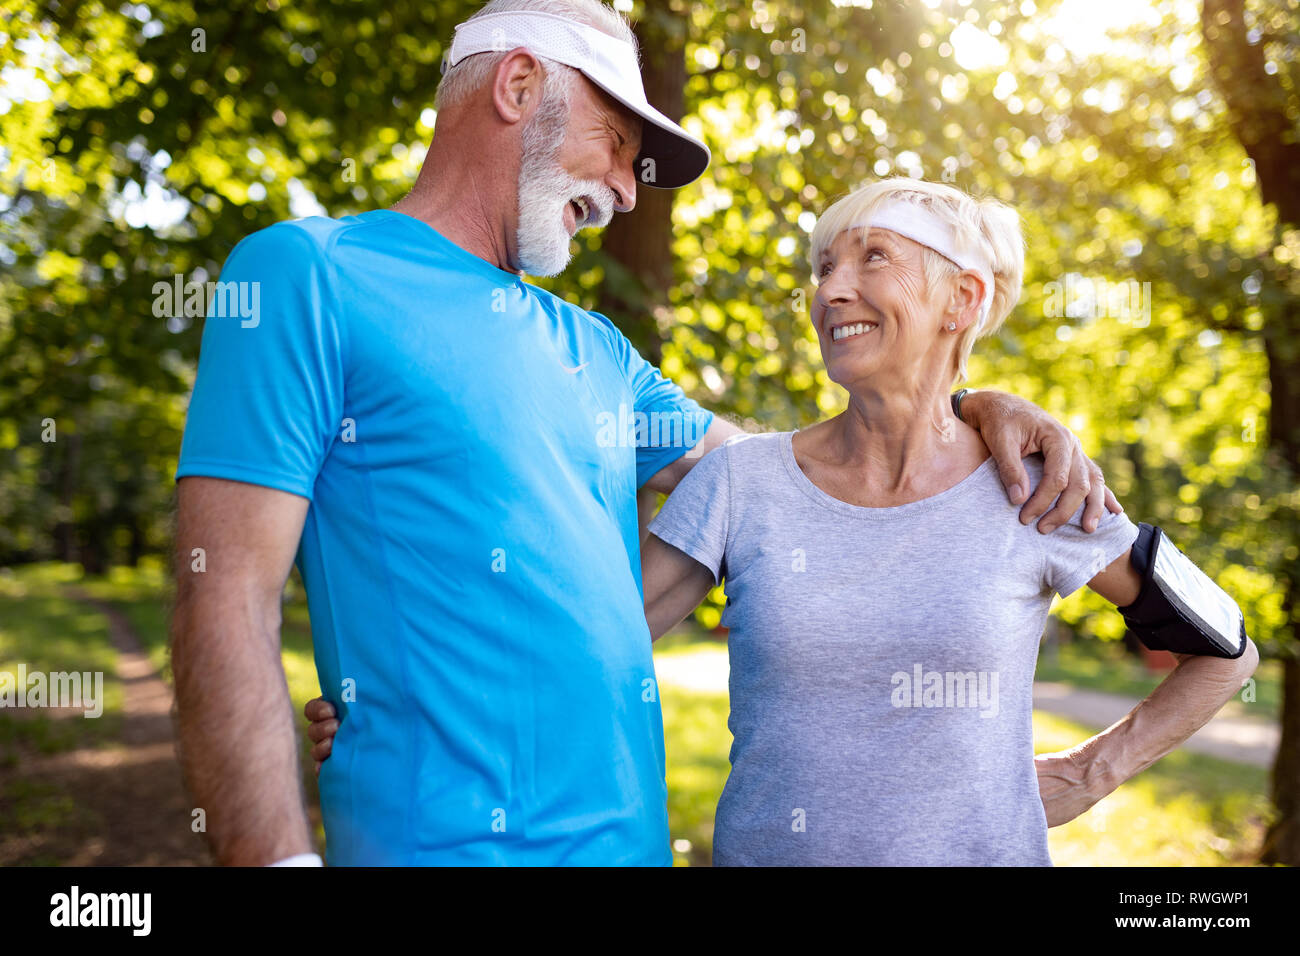 Fitness, sport and lifestyle concept - happy mature couple in sports clothes outdoors Stock Photo